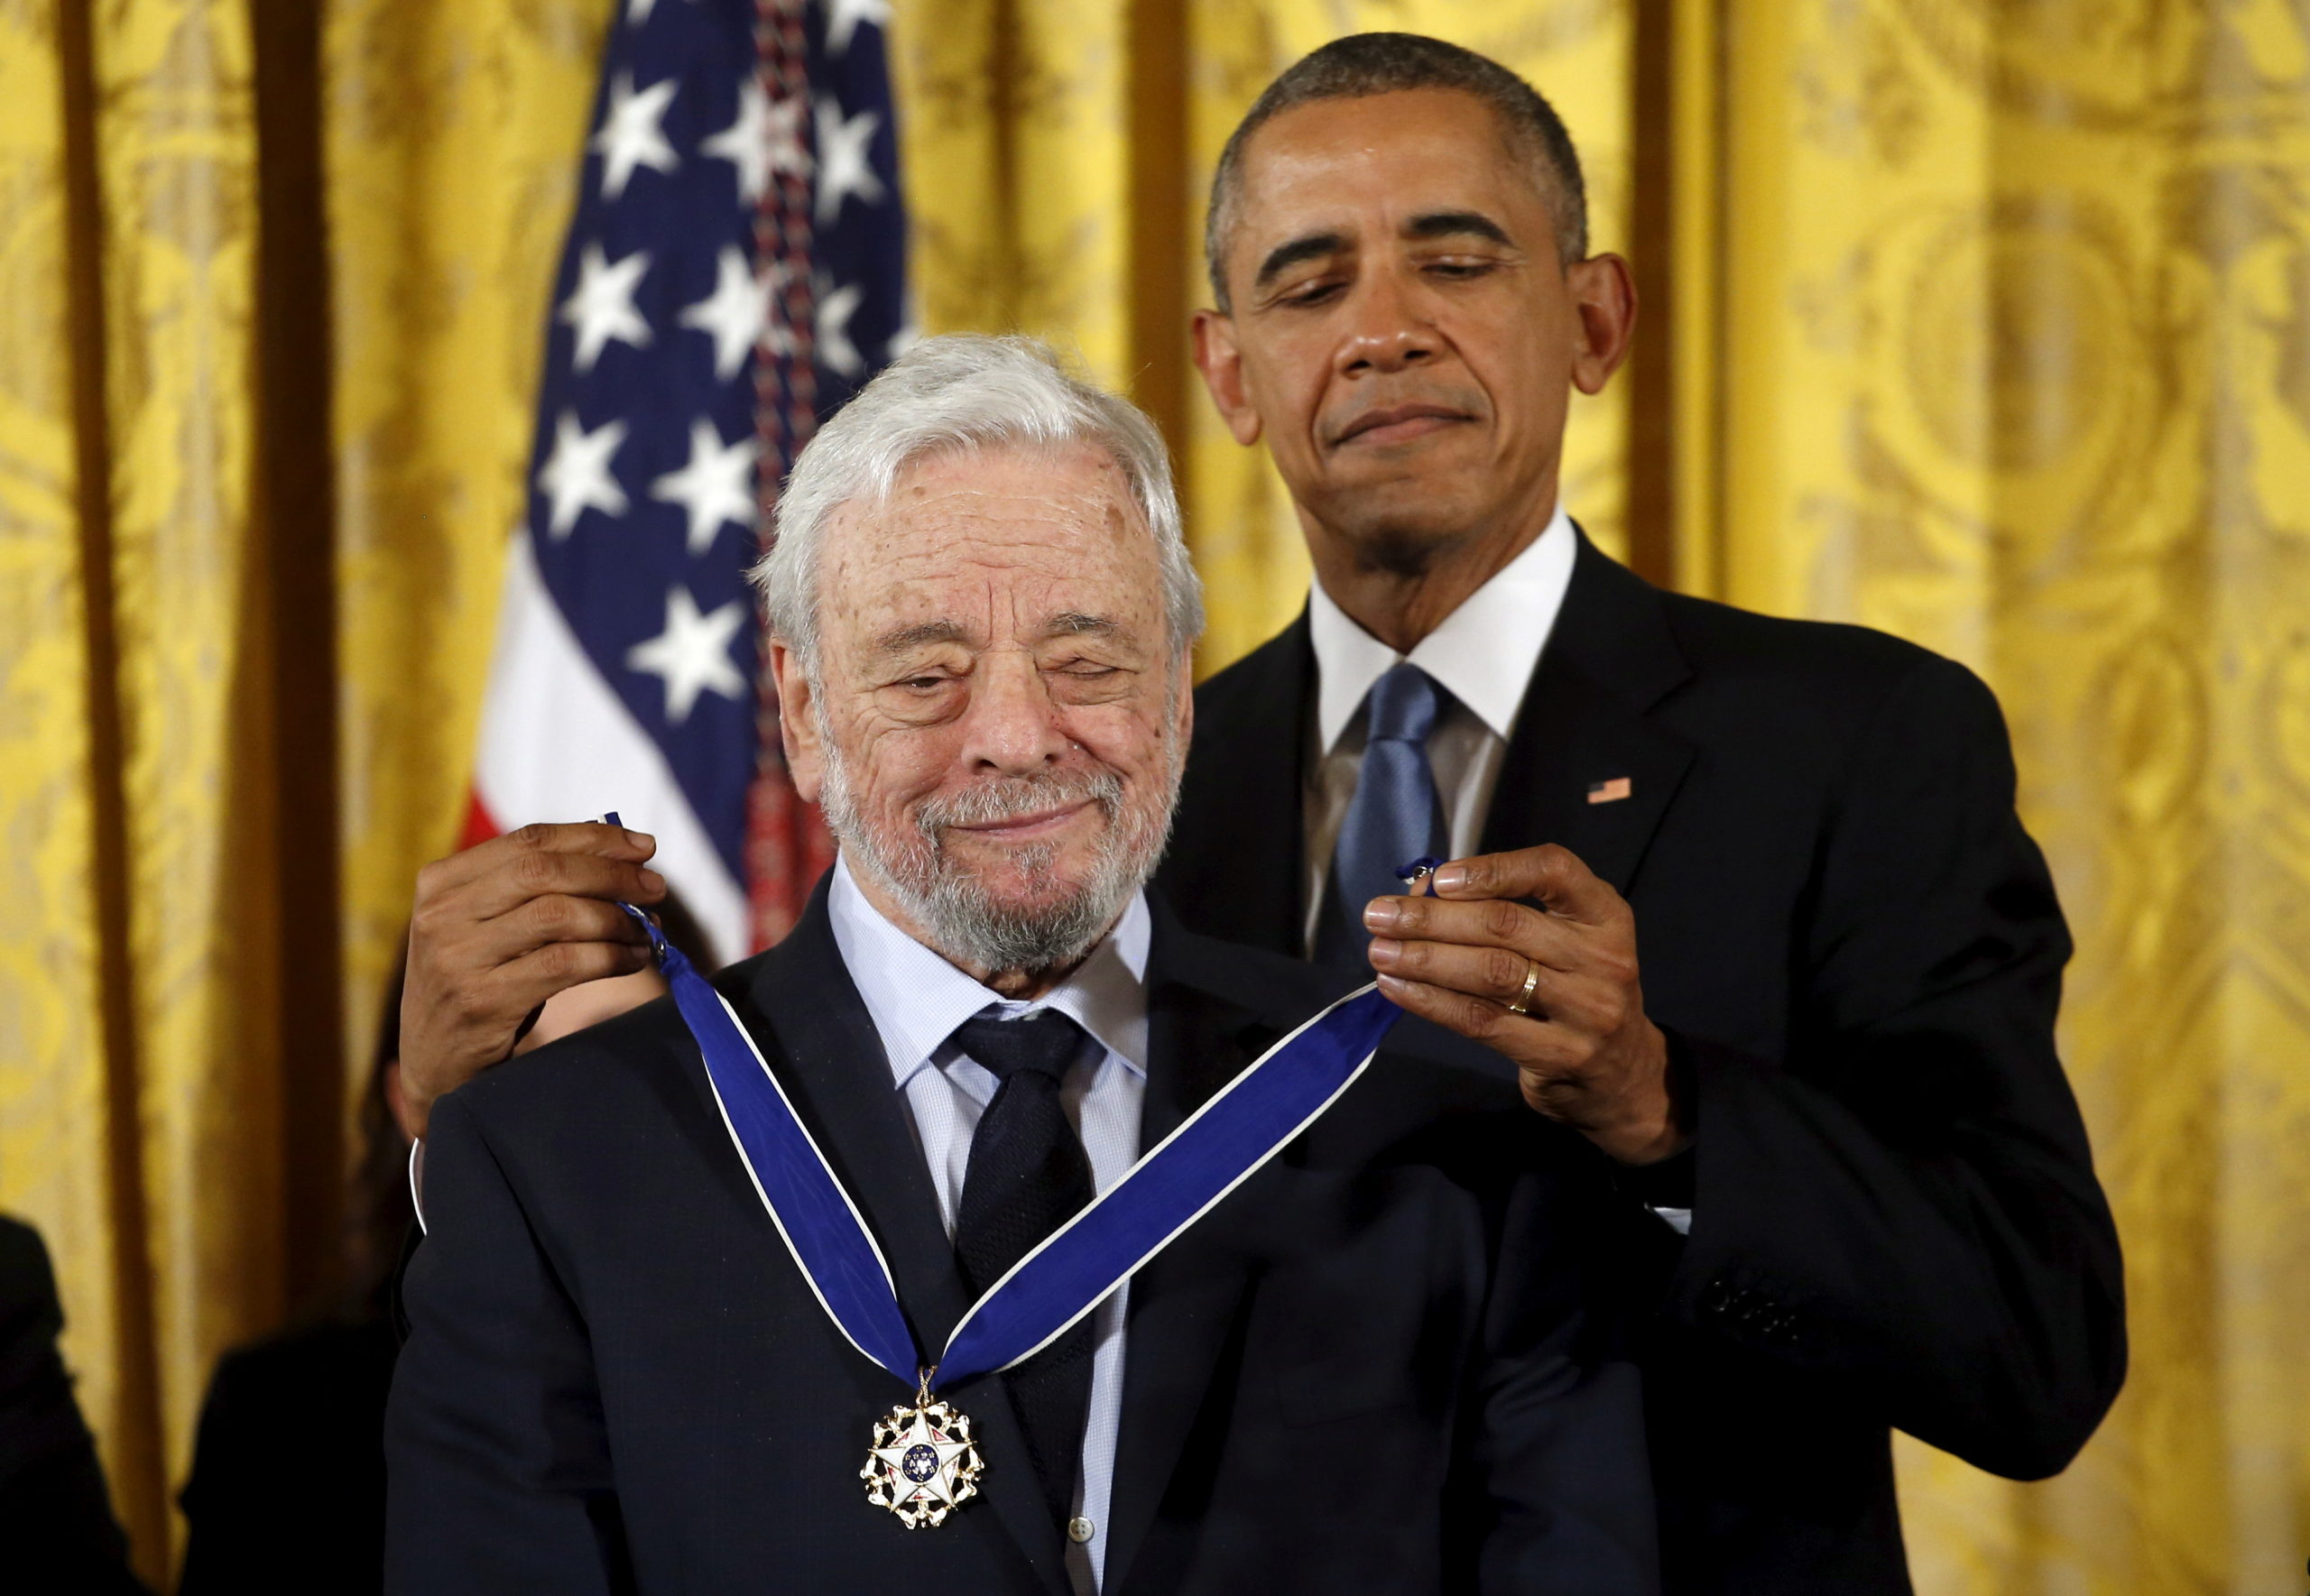 FILE PHOTO: U.S. President Barack Obama presents the Presidential Medal of Freedom to composer and lyricists Stephen Sondheim during an event in the East Room of the White House in Washington November 24, 2015. REUTERS/Carlos Barria